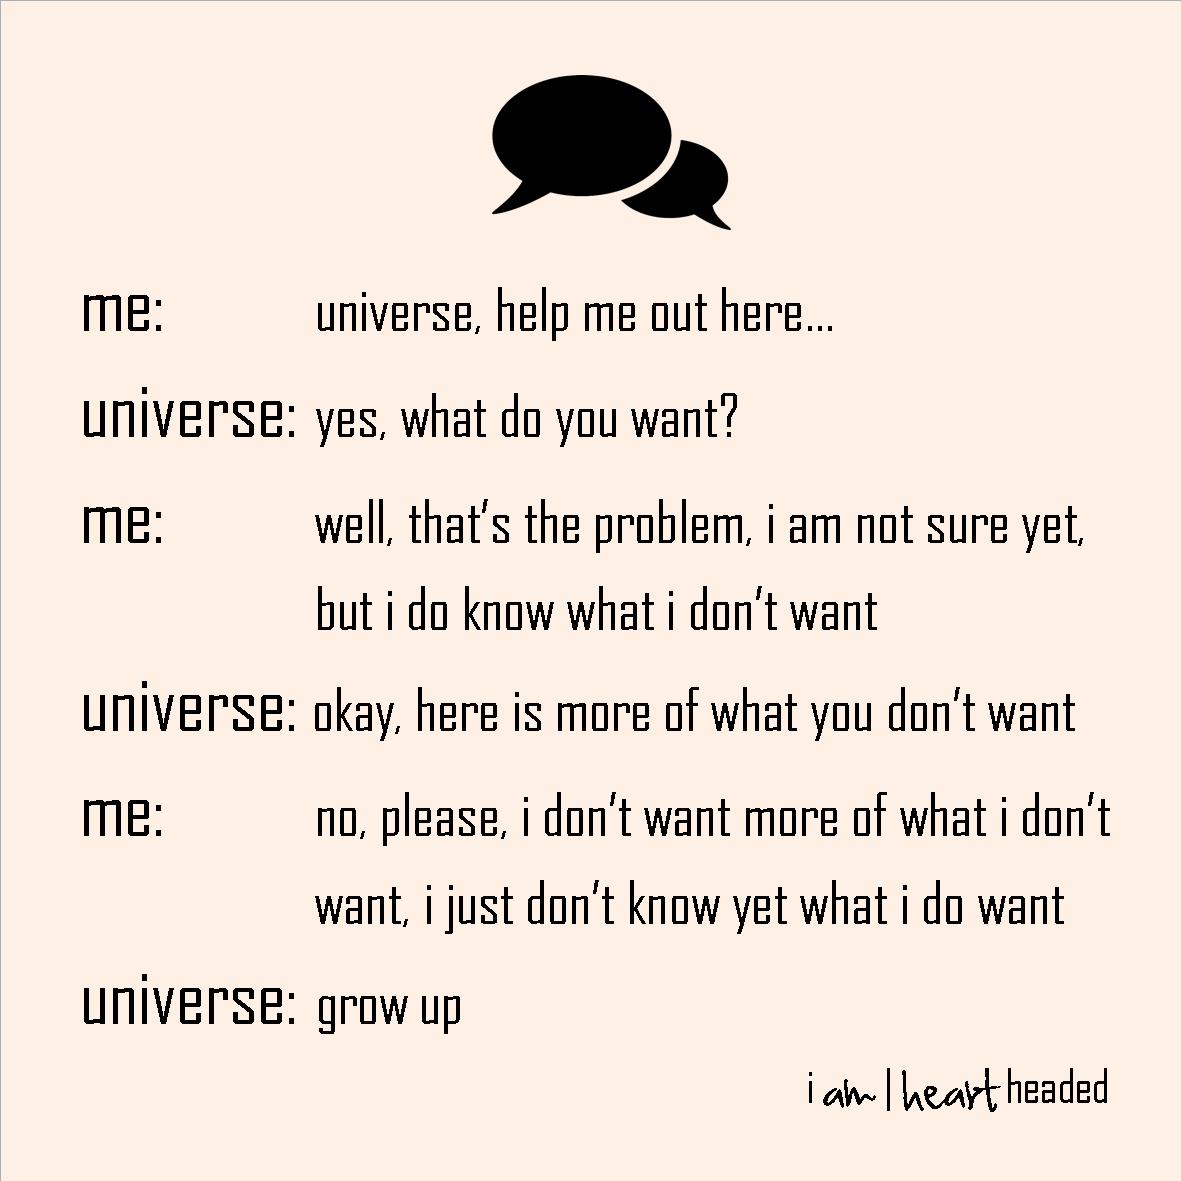 full-size featured image of quote 'conversations with the universe' in category 'irony' at i am | heart headed